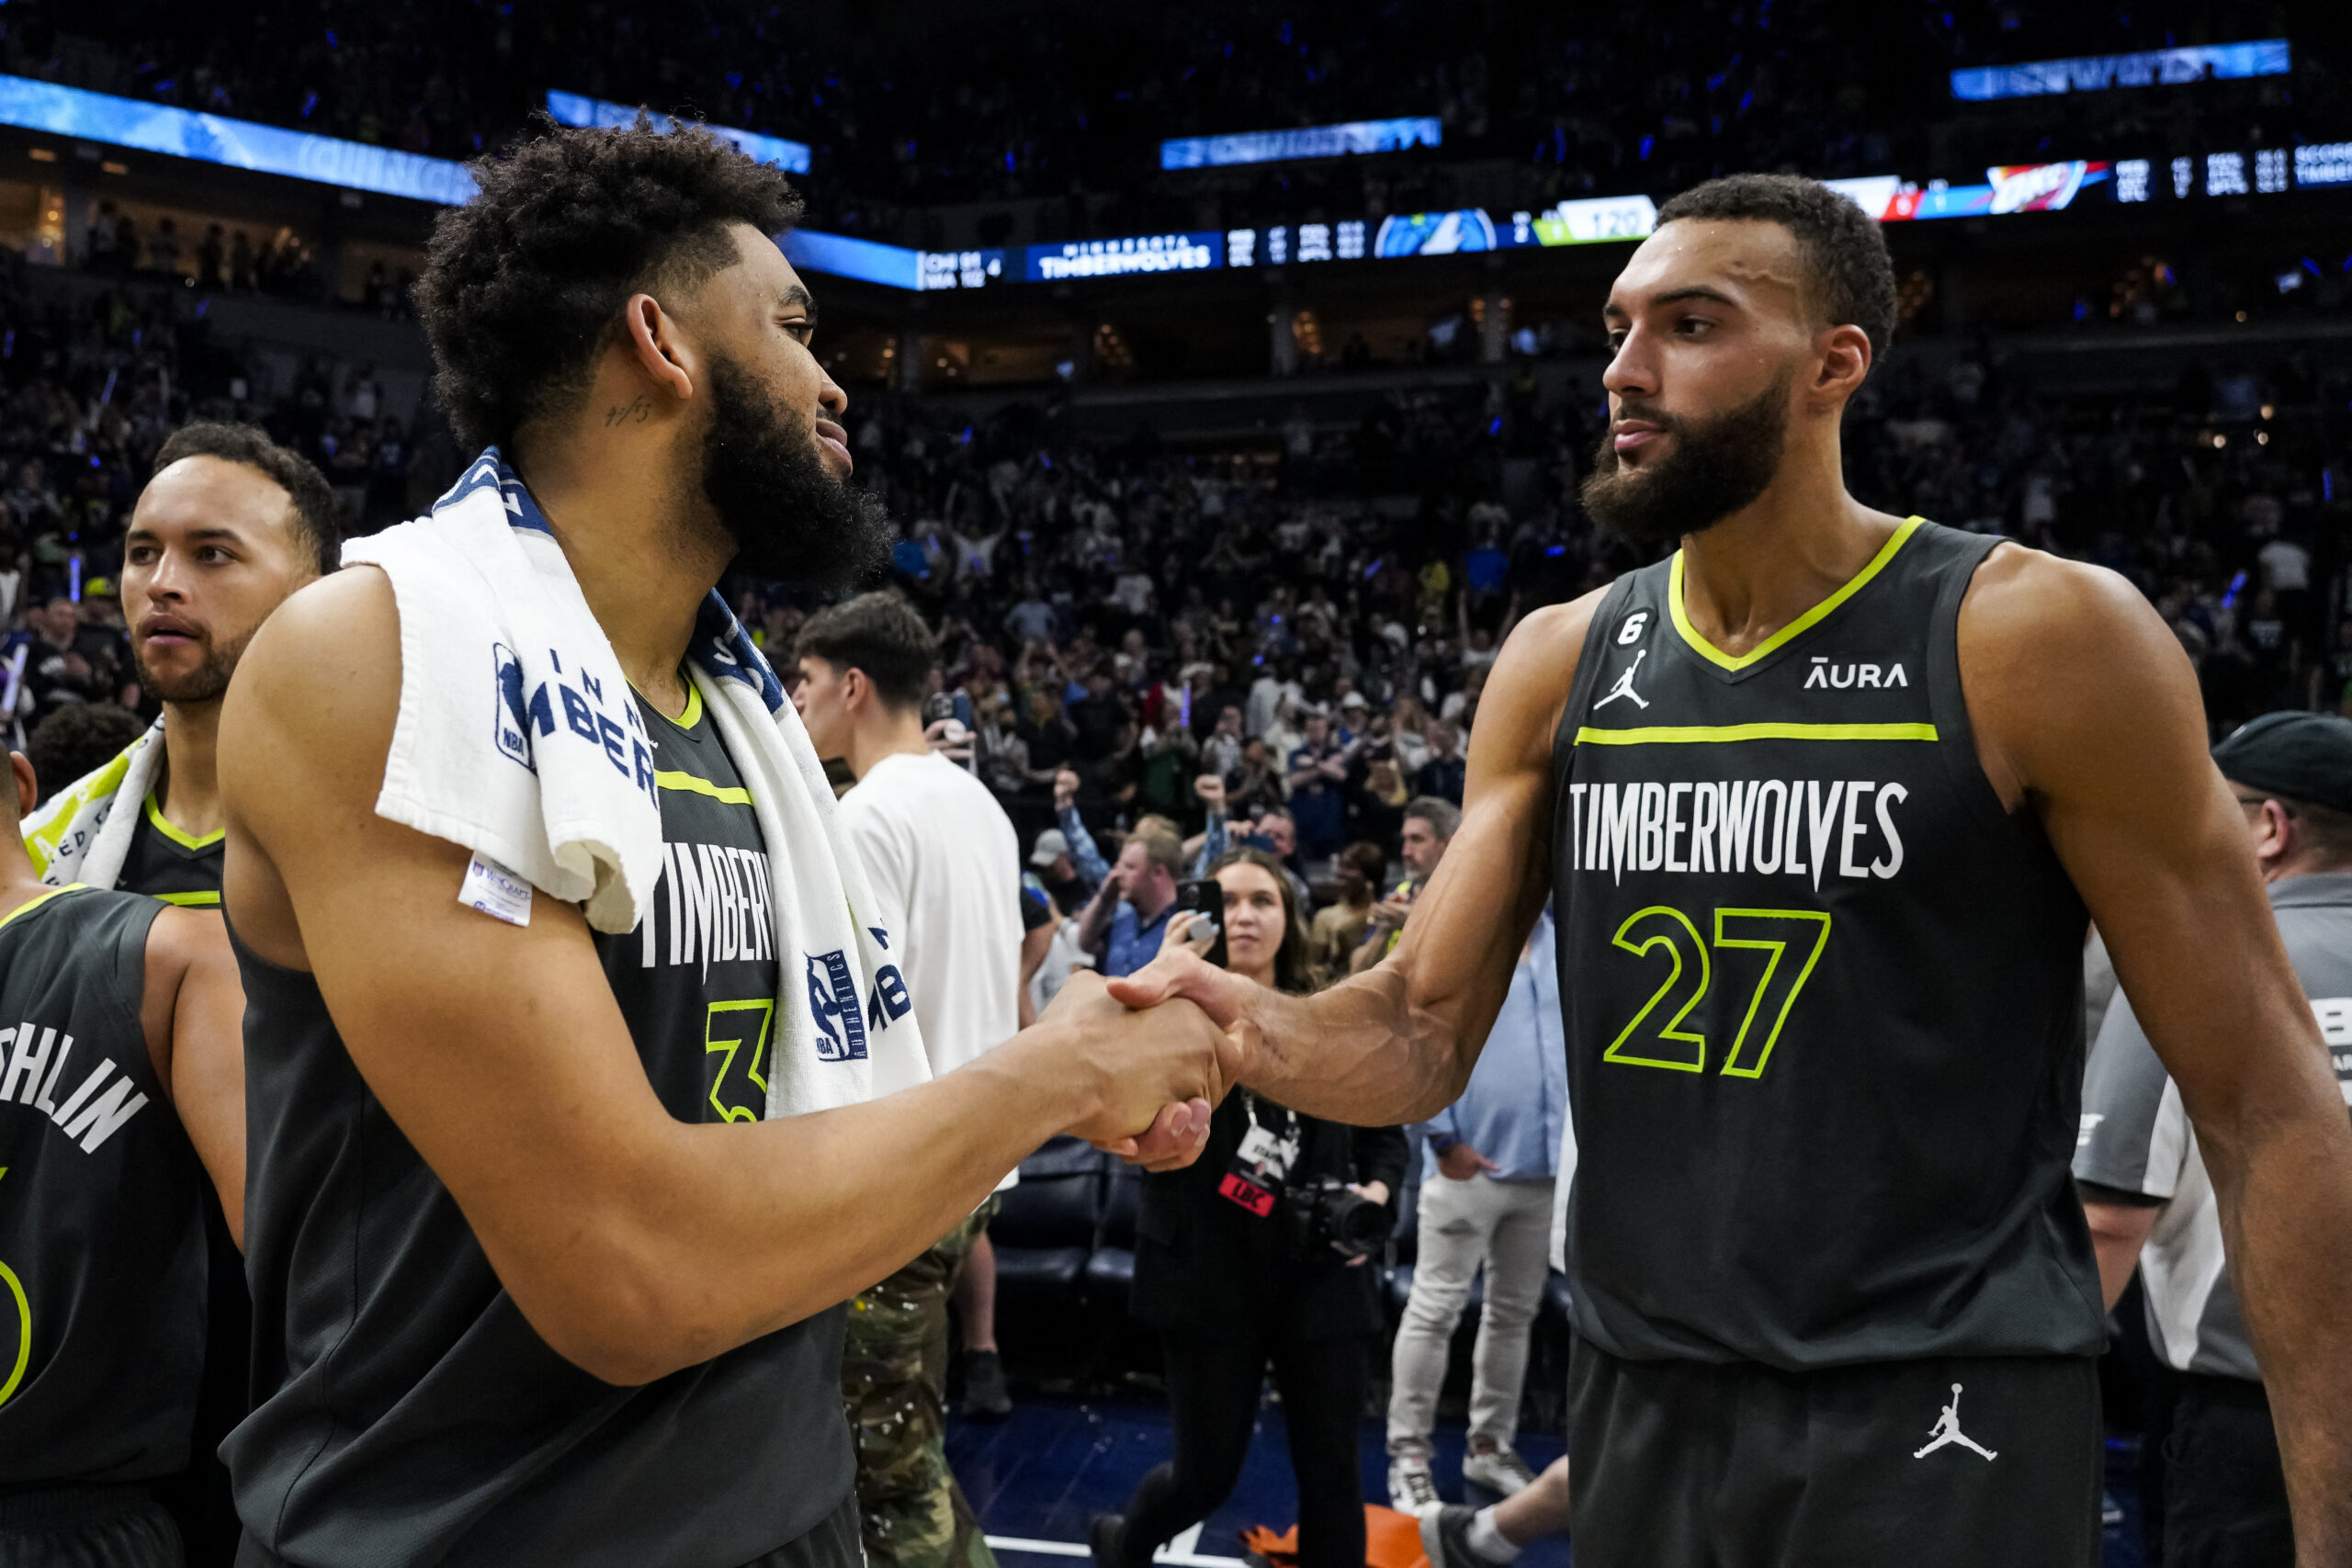 : Karl-Anthony Towns #32 and Rudy Gobert #27 of the Minnesota Timberwolves interact after the NBA Play-In game against the Oklahoma City Thunder at Target Center on April 14, 2023 in Minneapolis, Minnesota